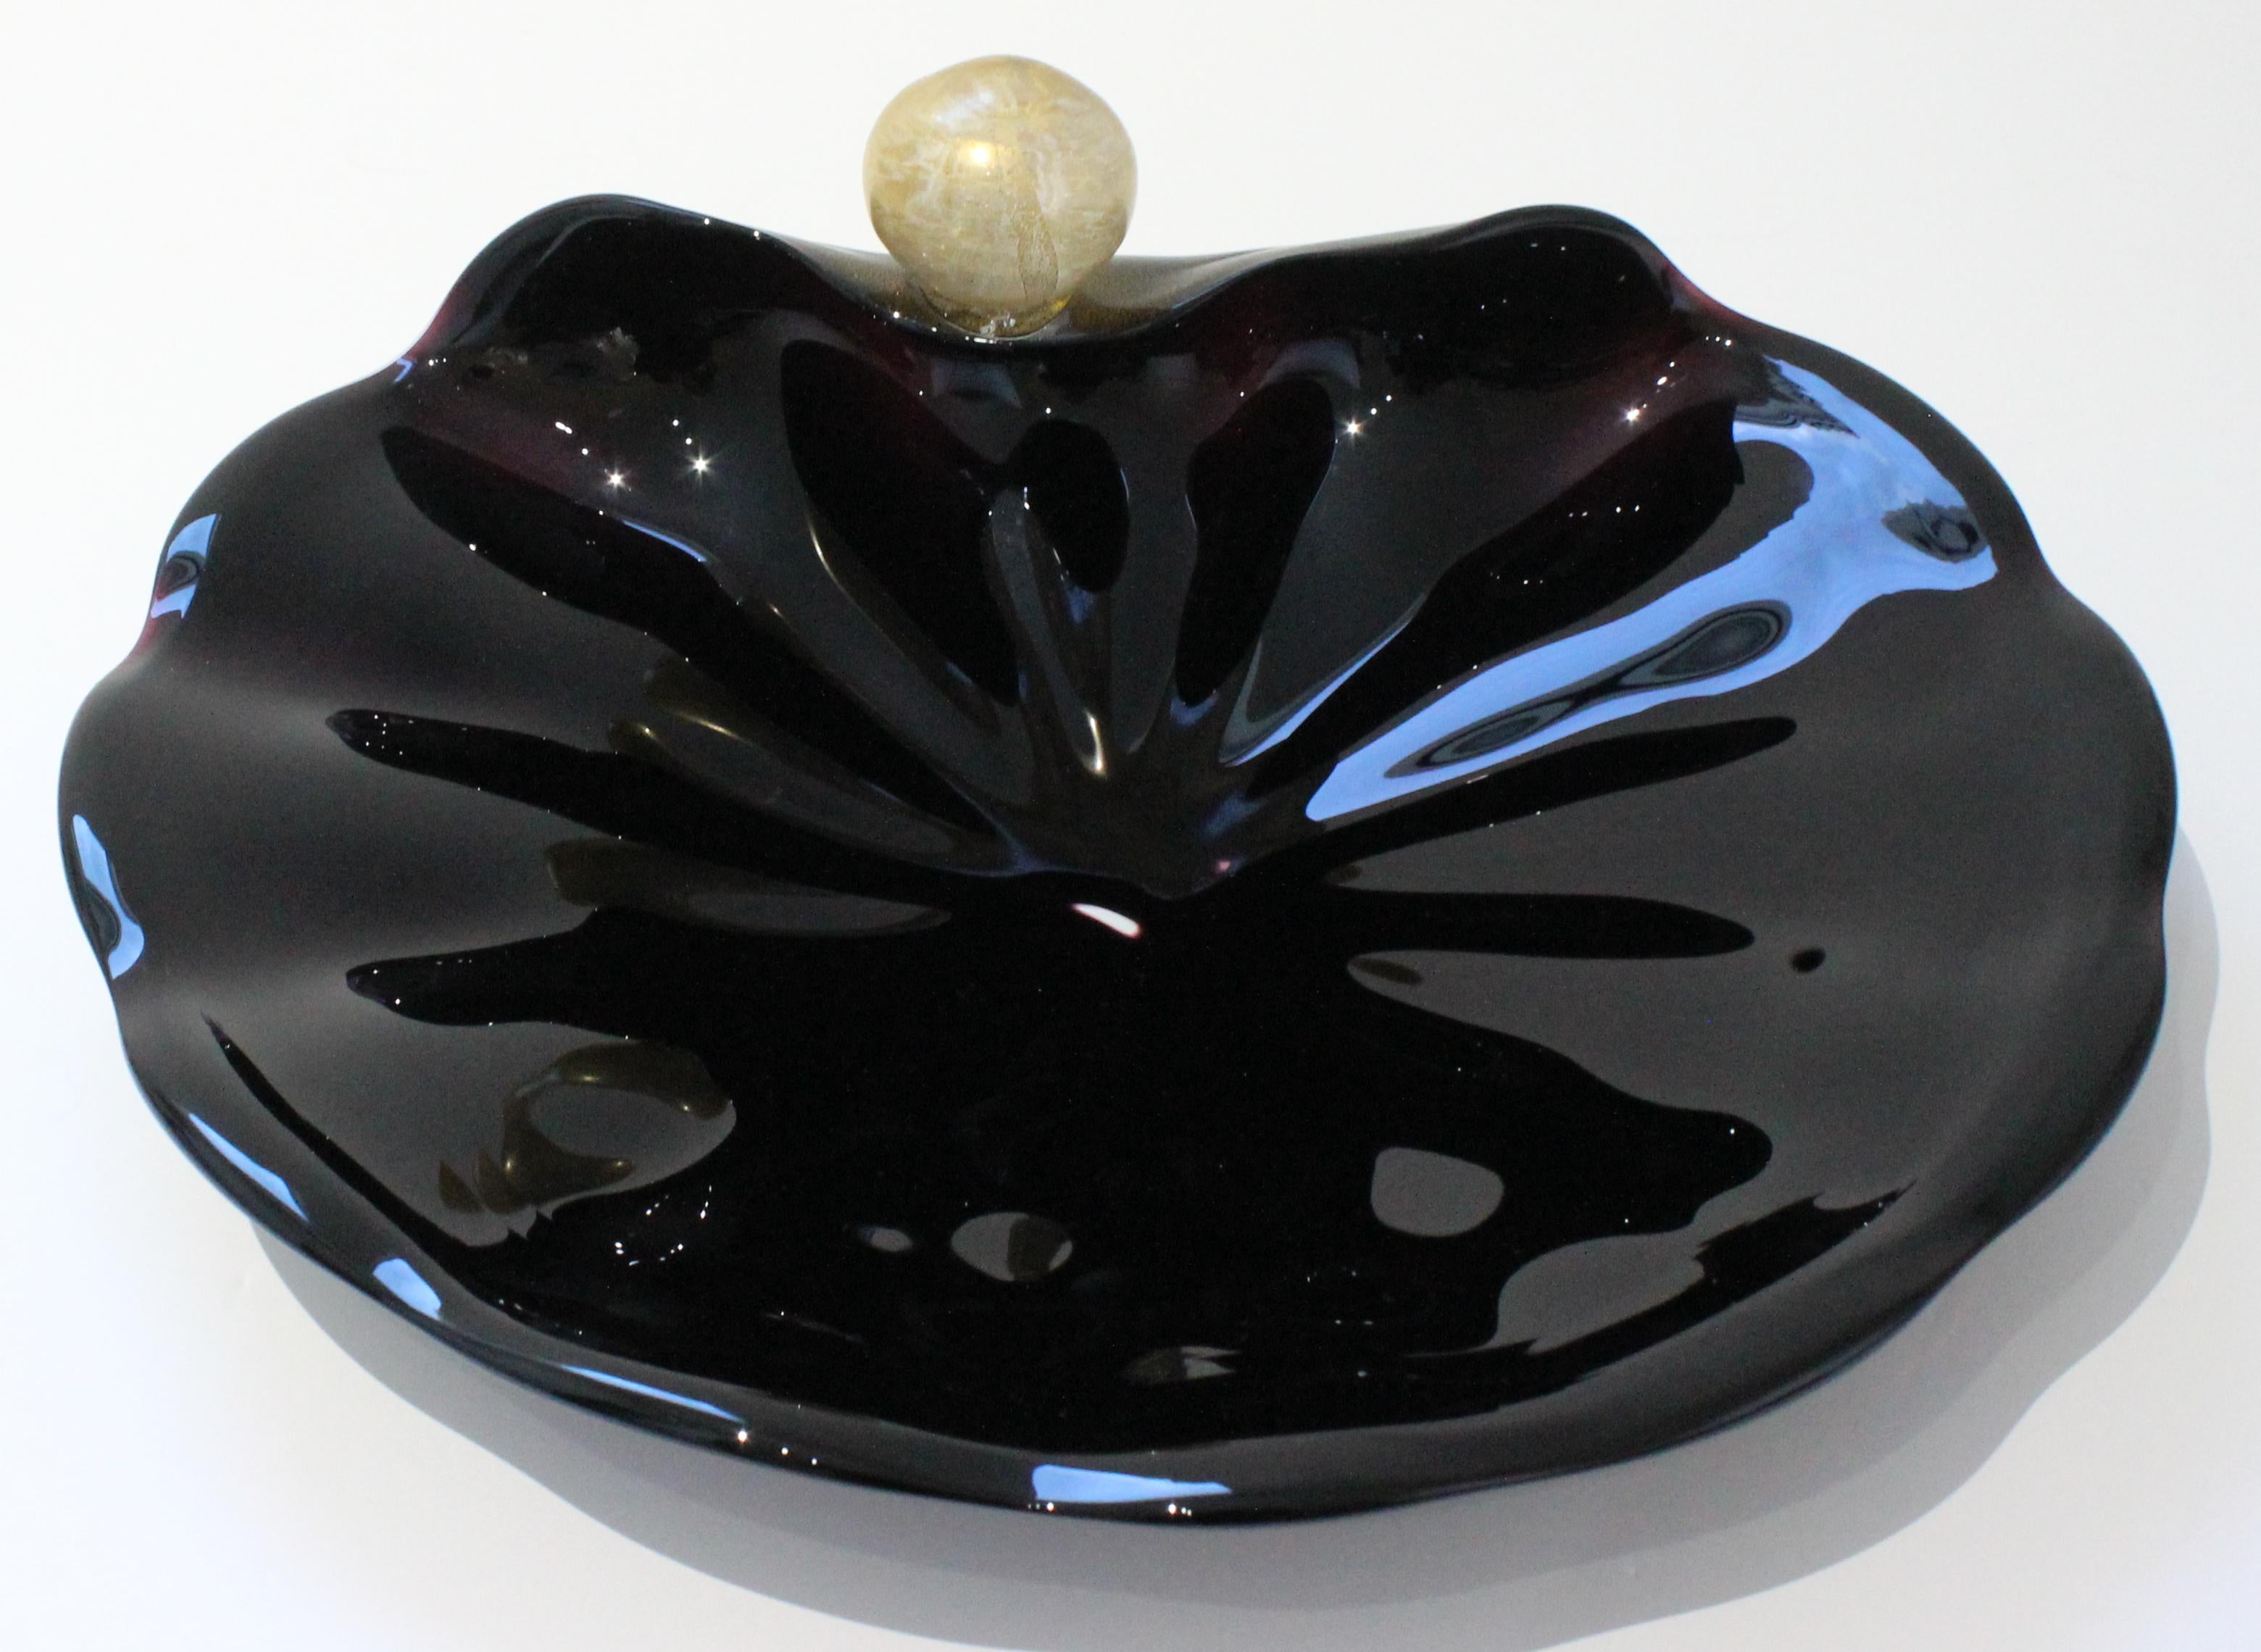 Hand-Crafted Murano Glass Clamshell Dish by Licio Zanetti For Sale